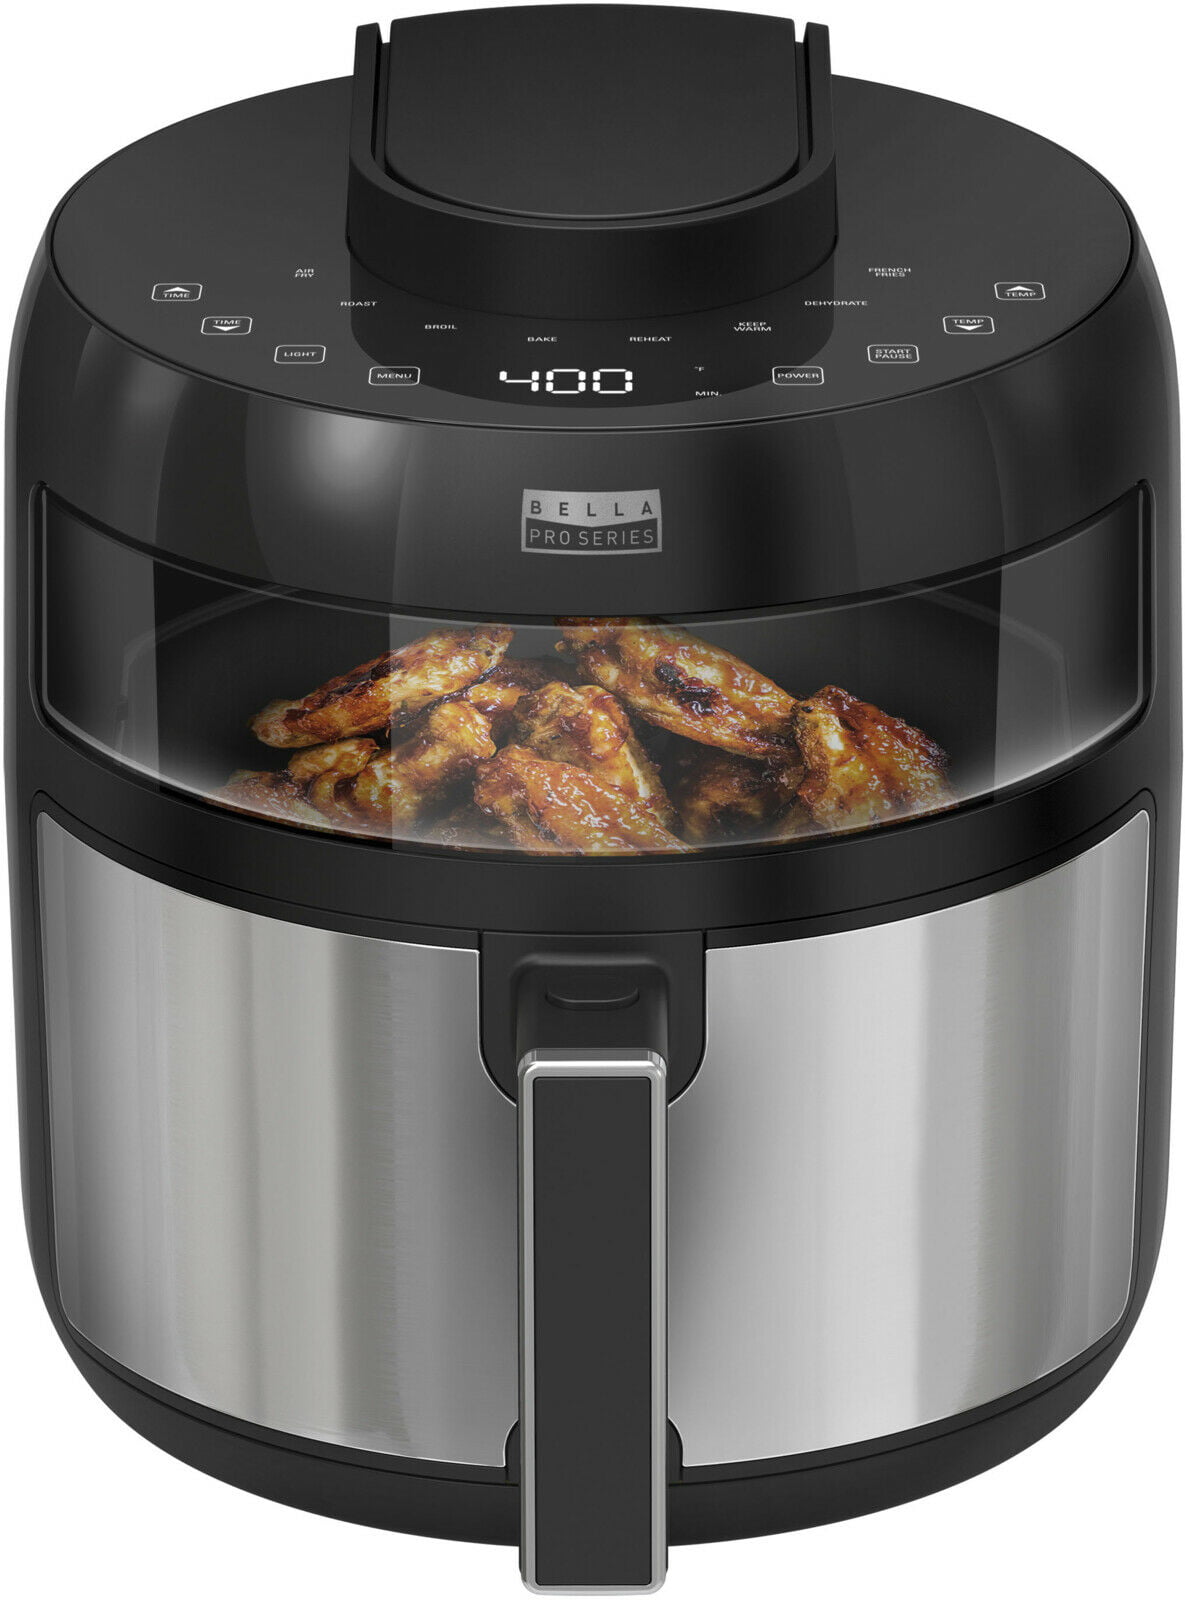  Bella Pro Series 6qt Digital Air Fryer with Stainless